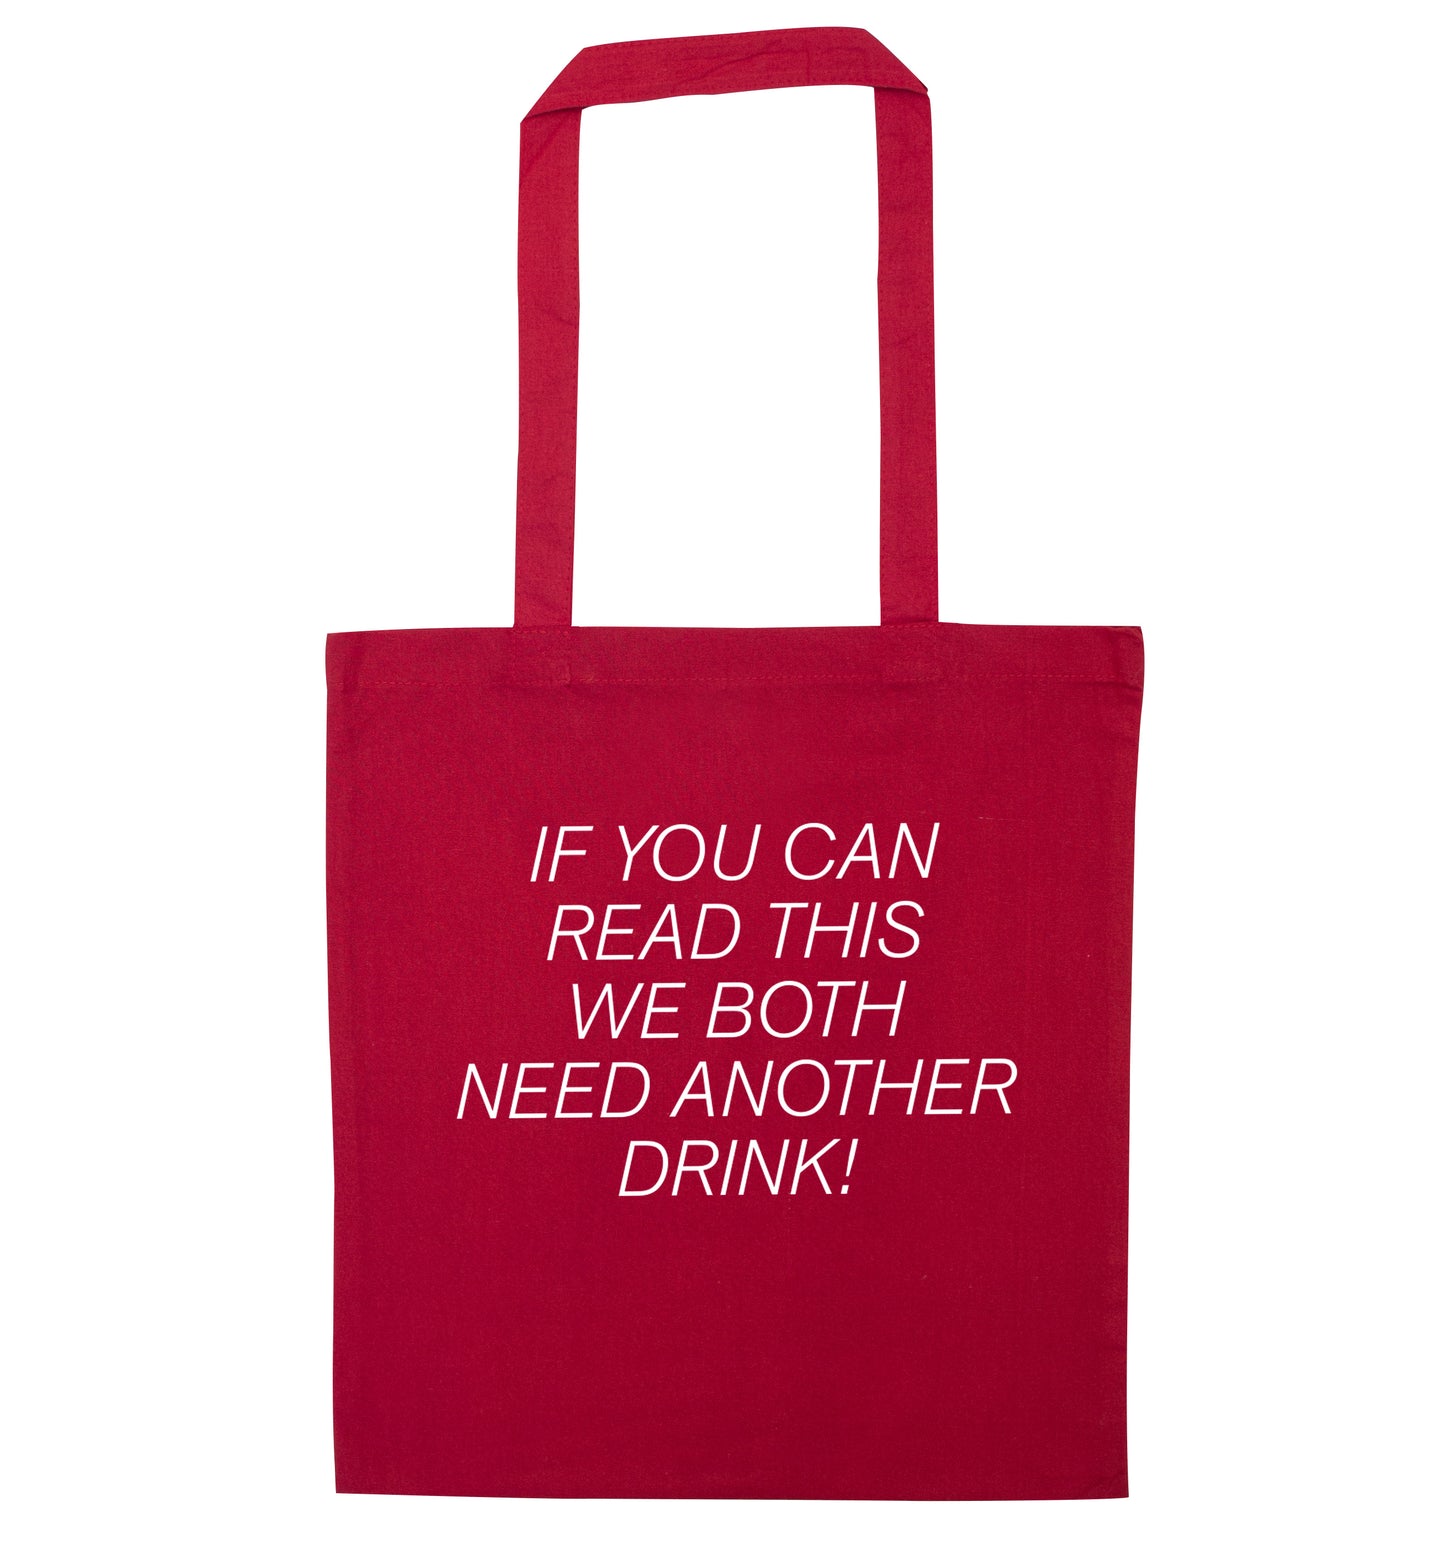 If you can read this we both need another drink! red tote bag